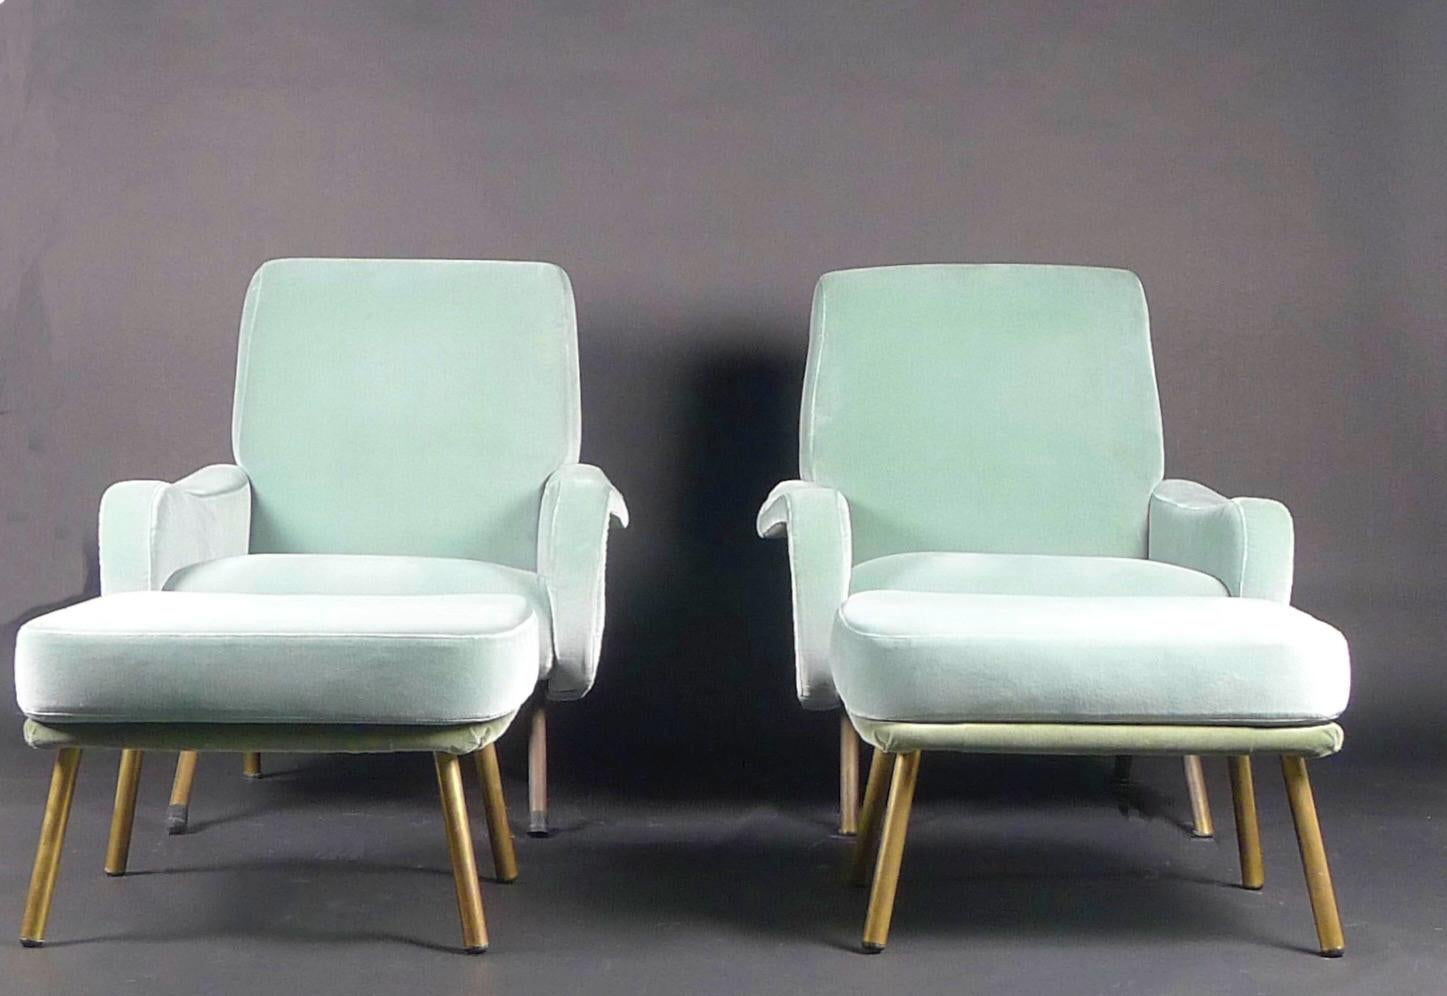 Marco Zanuso, Pair of Lady Chairs and Ottomans, manufactured by Arflex, Italy, mid 1950s

This mid-Century classic design was awarded the gold medal in the 1951 Milan Triennale.

Newly upholstered in velour fabric, soft duck egg blue with